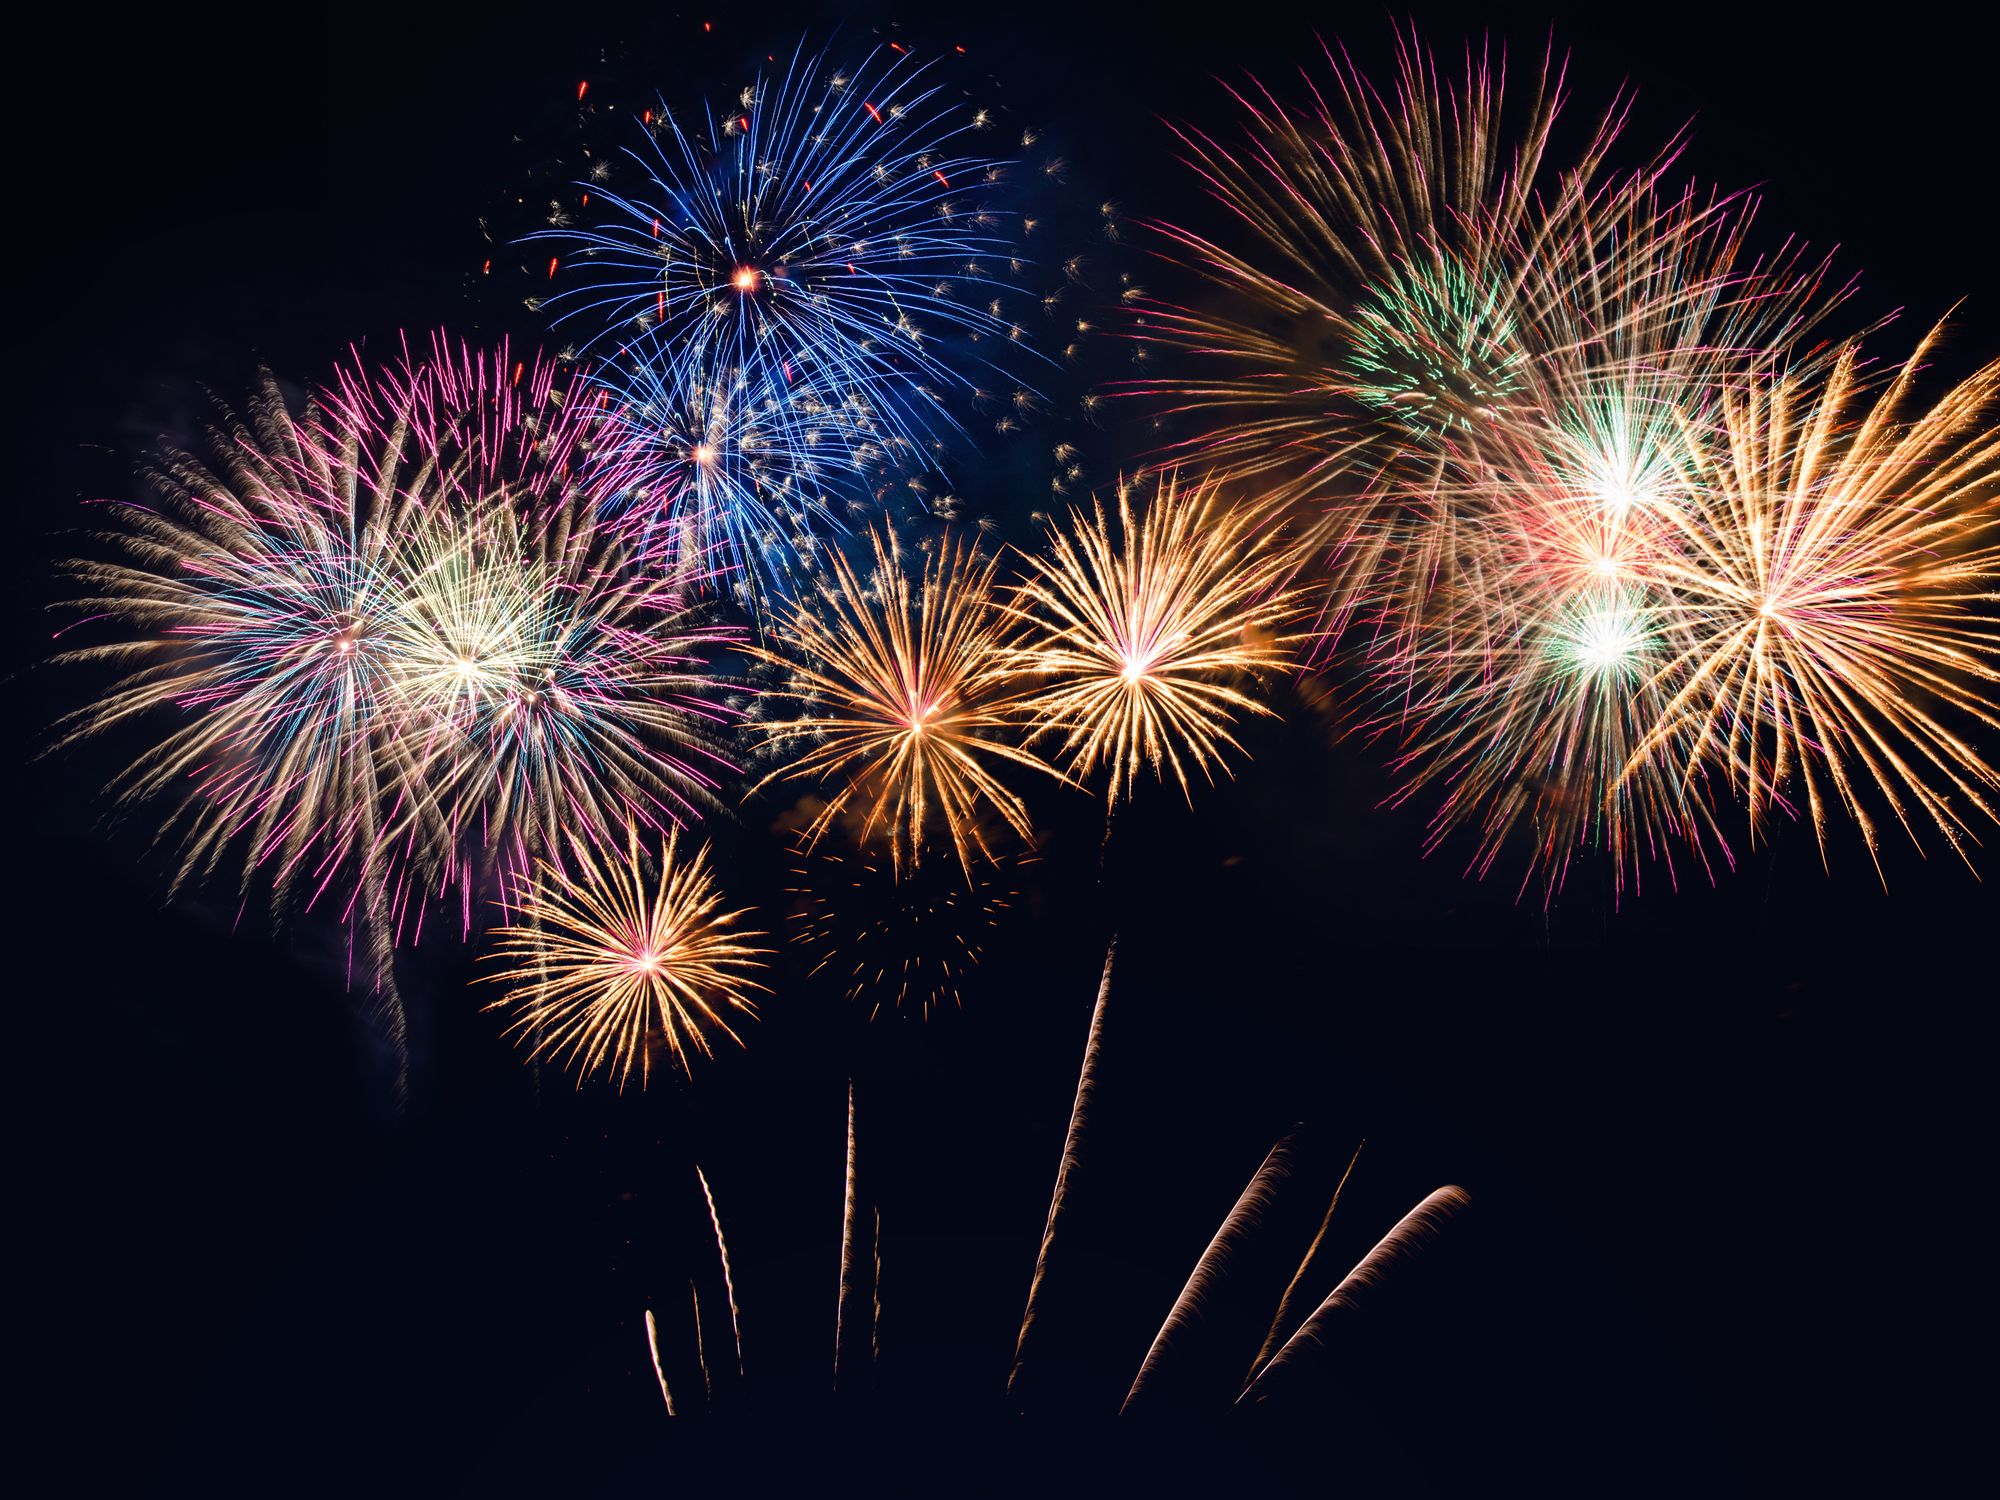 How Do Fireworks Work? The Science of Fireworks